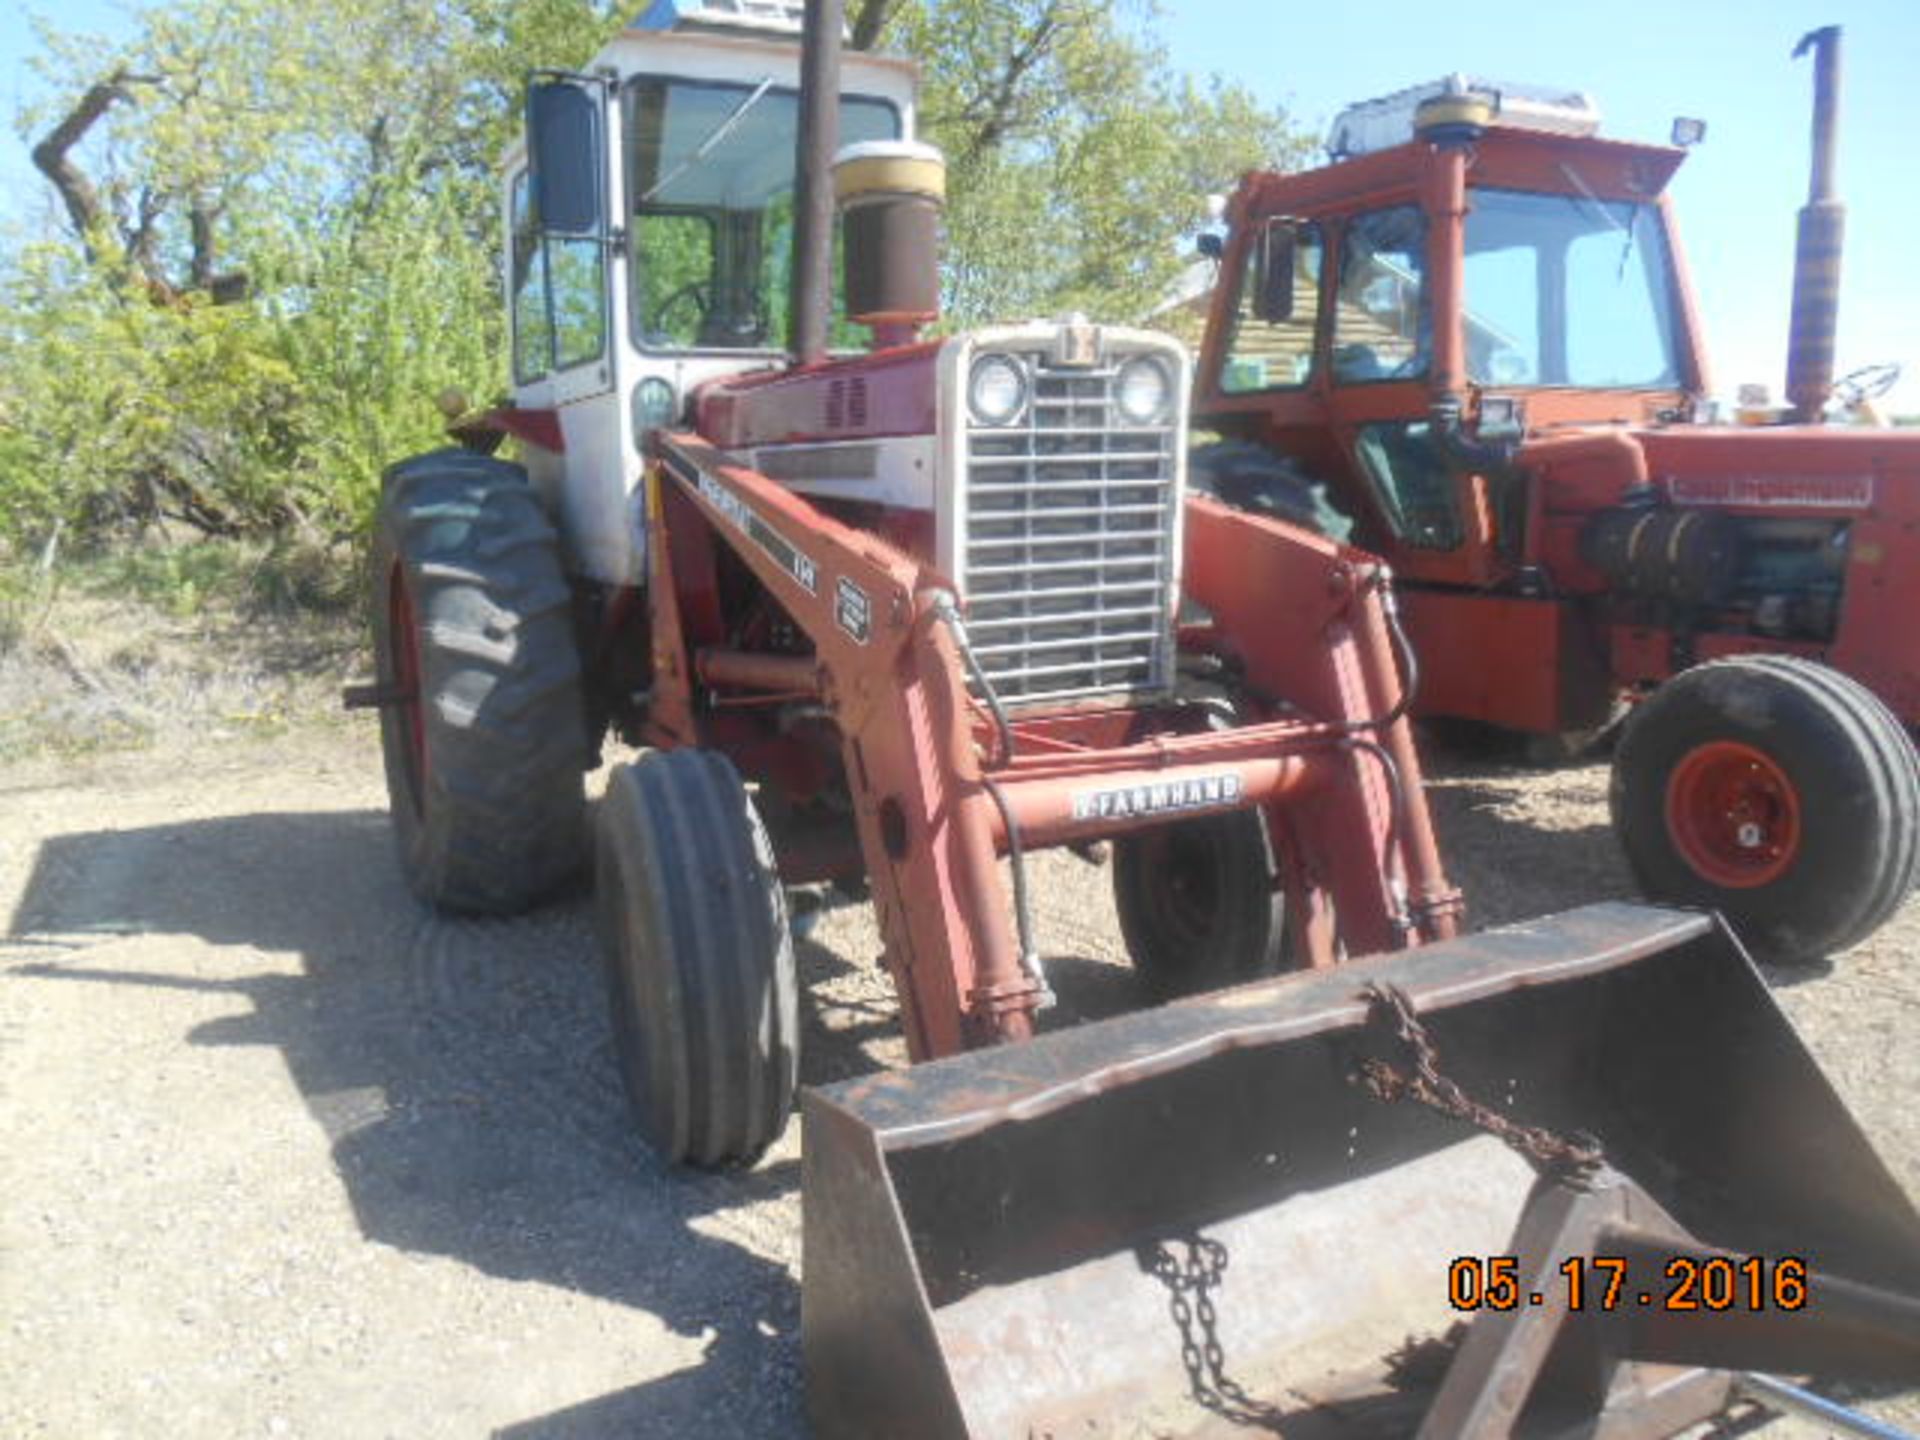 IHC 1256 Tractor (1206 motor) cab, Farmhand F348 loader - Power steering issues?? - Image 3 of 3